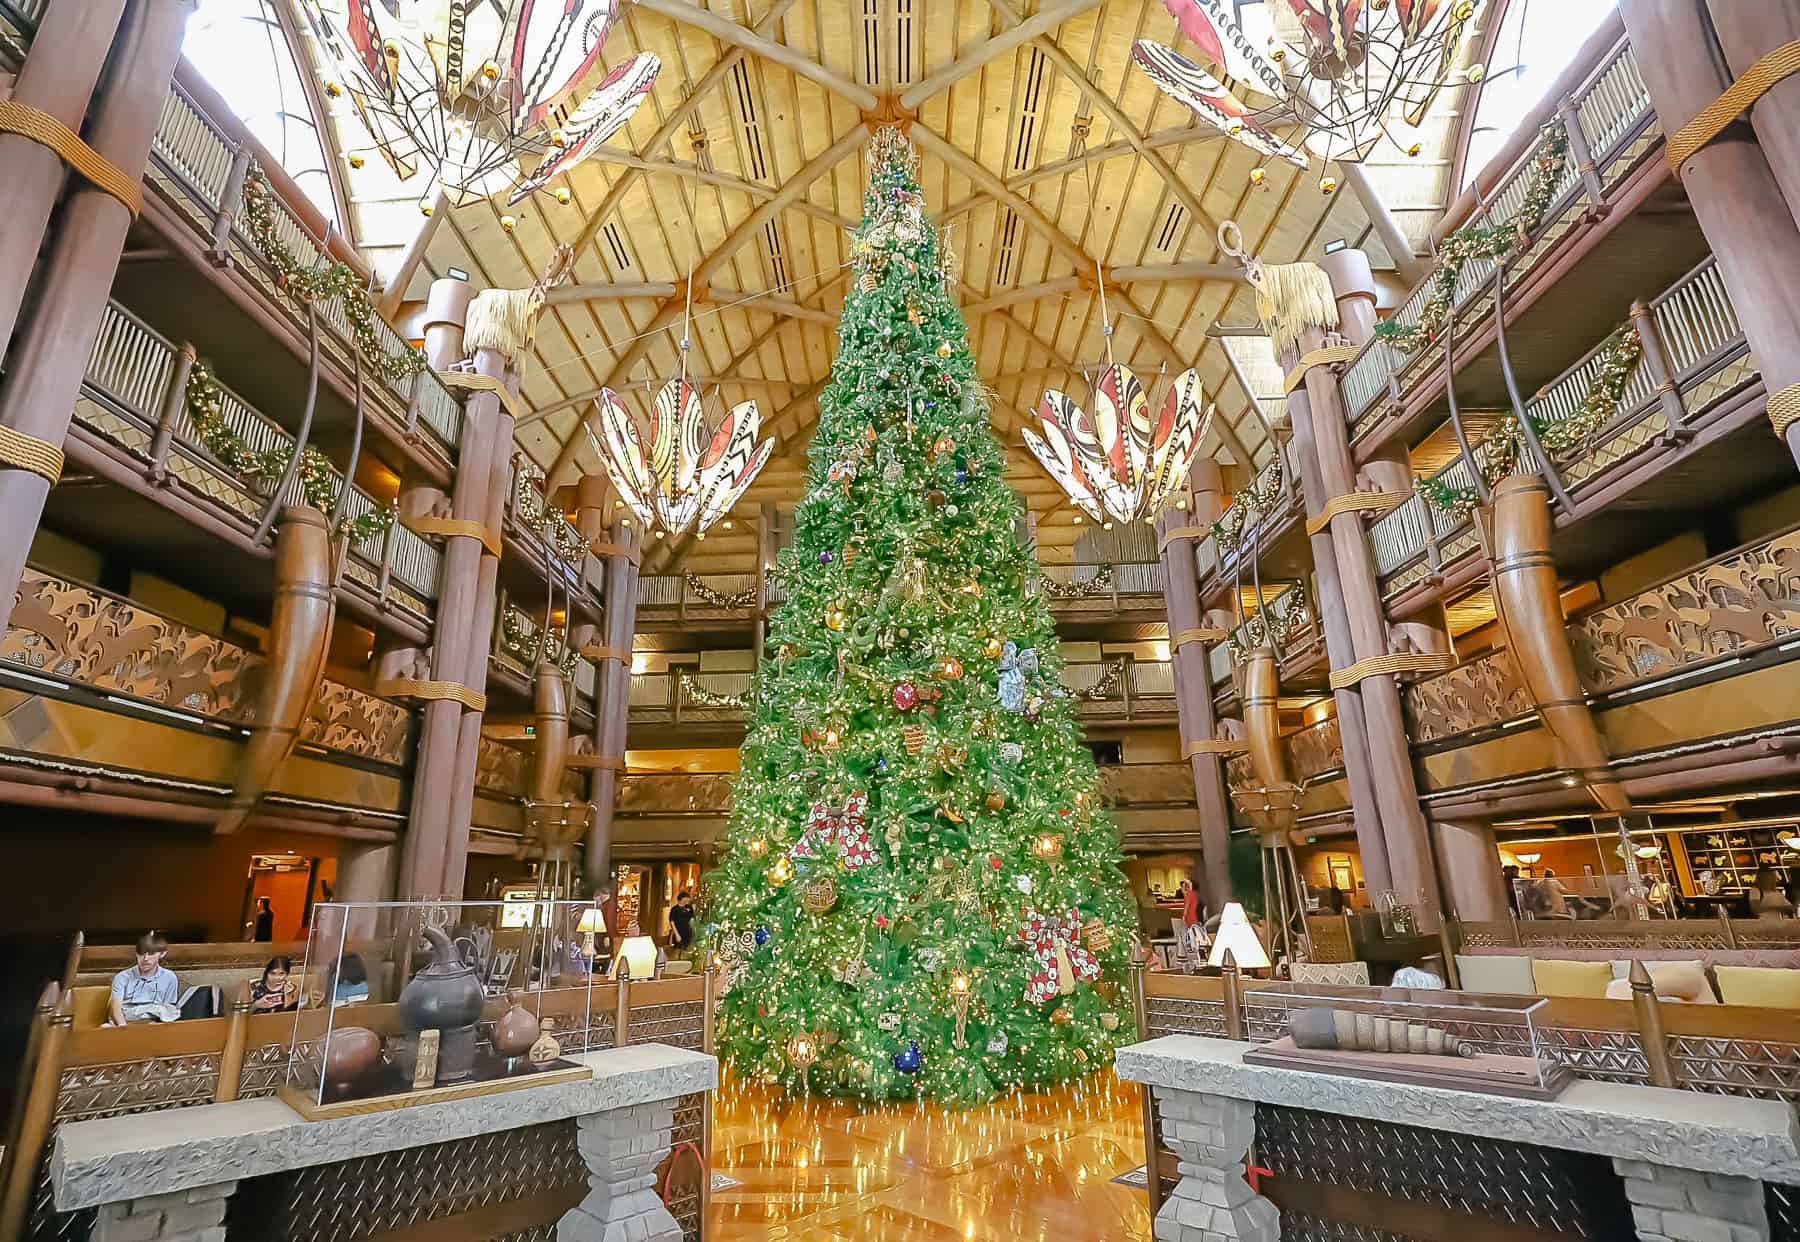 The Jambo House Christmas tree sits in the center of the lobby. 